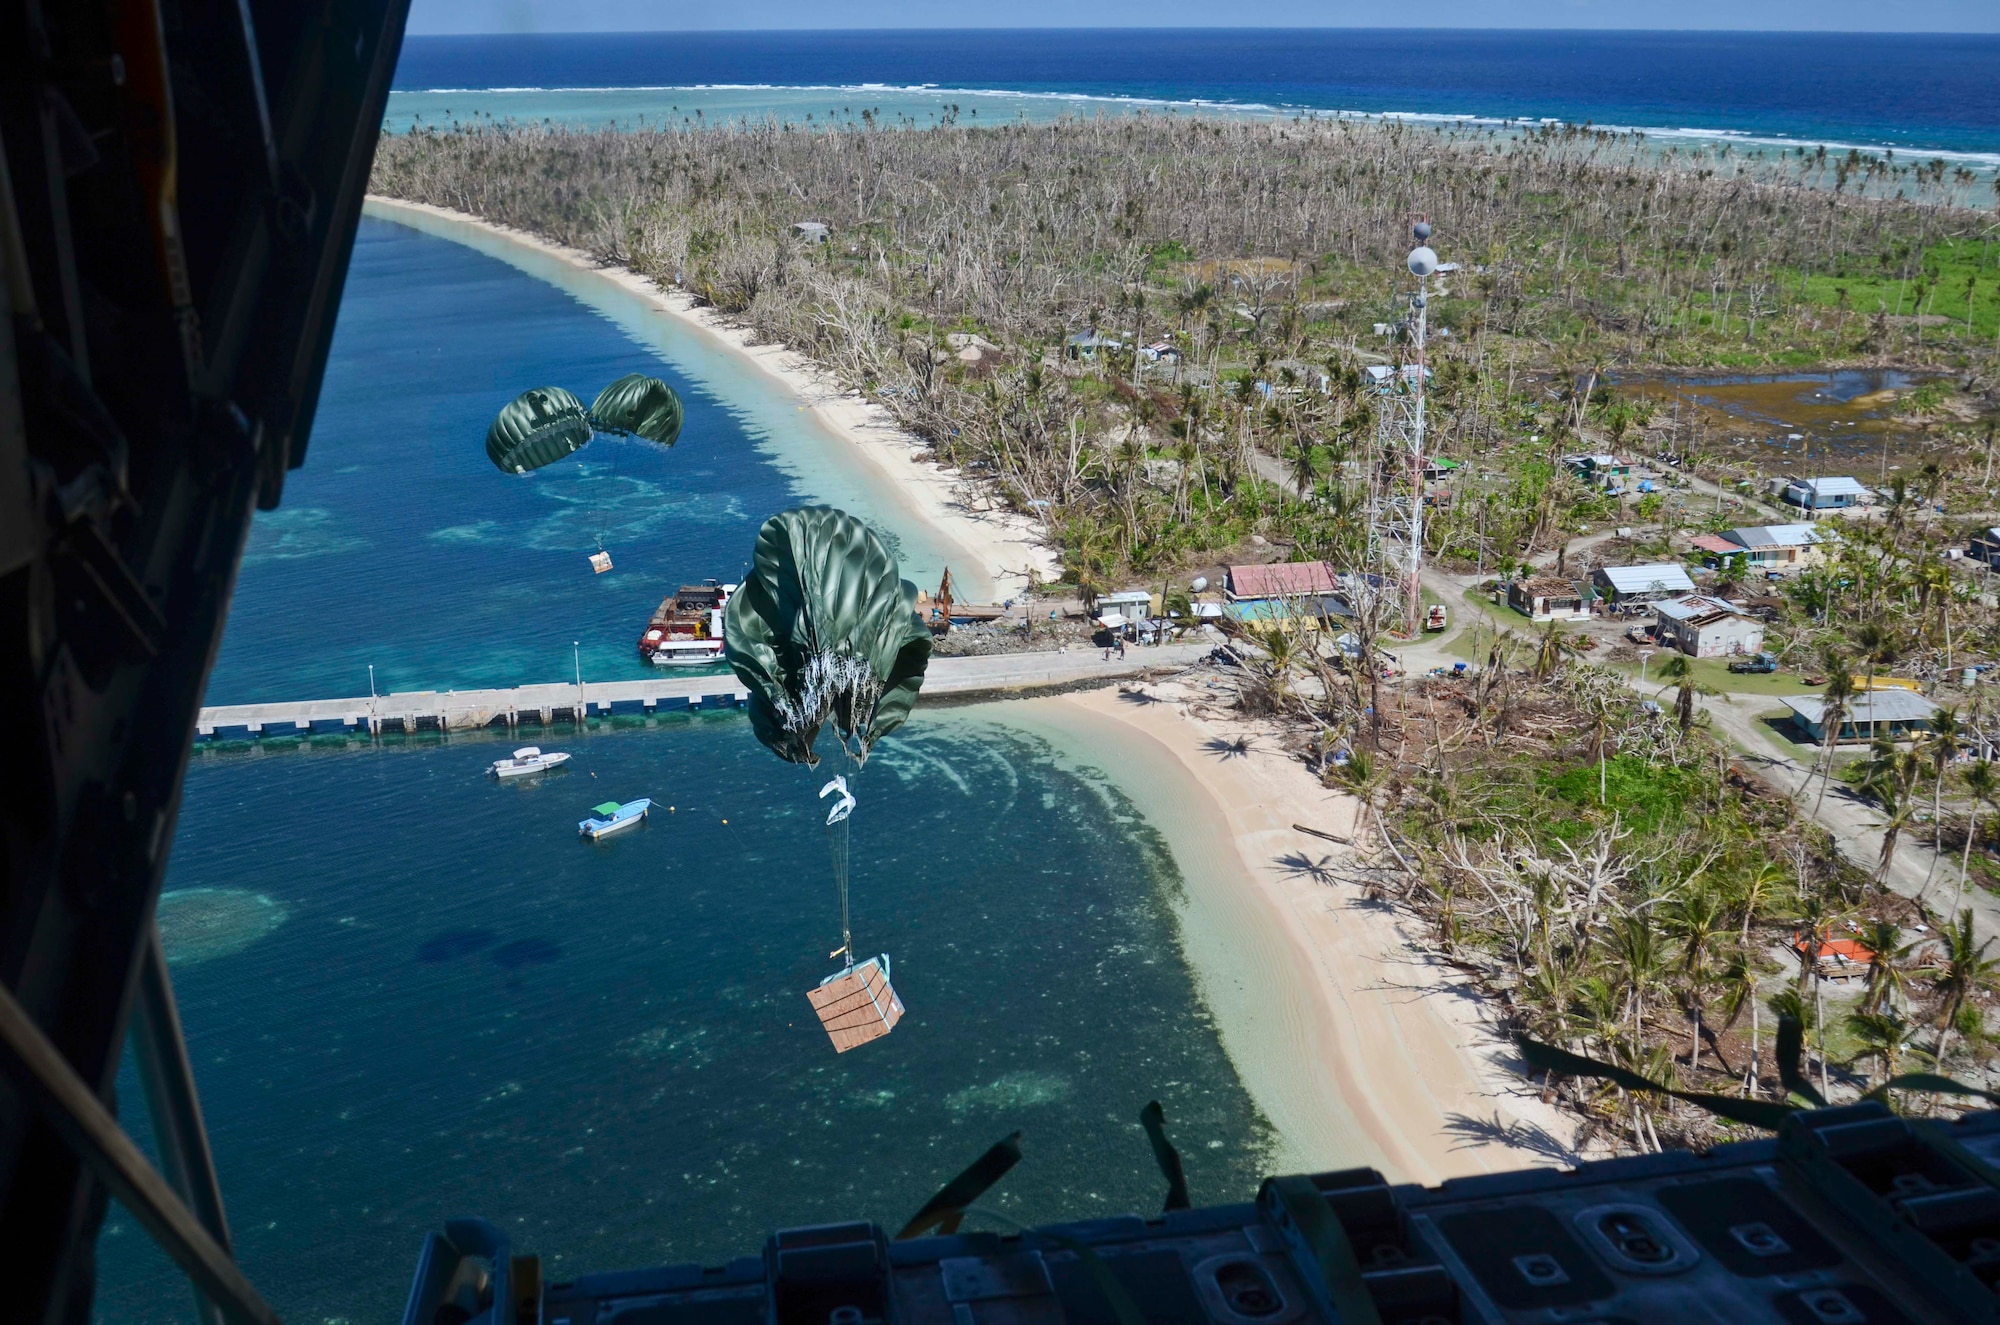 Packages make their way to the shore of Kayangel Island during an Operation Christmas Drop mission over the Pacific Ocean Dec. 11, 2013. The Island of Kayangel also experienced the devastating effects of Typhoon Haiyan that ravaged the Philippines and other island in the area. (U.S. Air Force photo by Senior Airman Marianique Santos/Released)